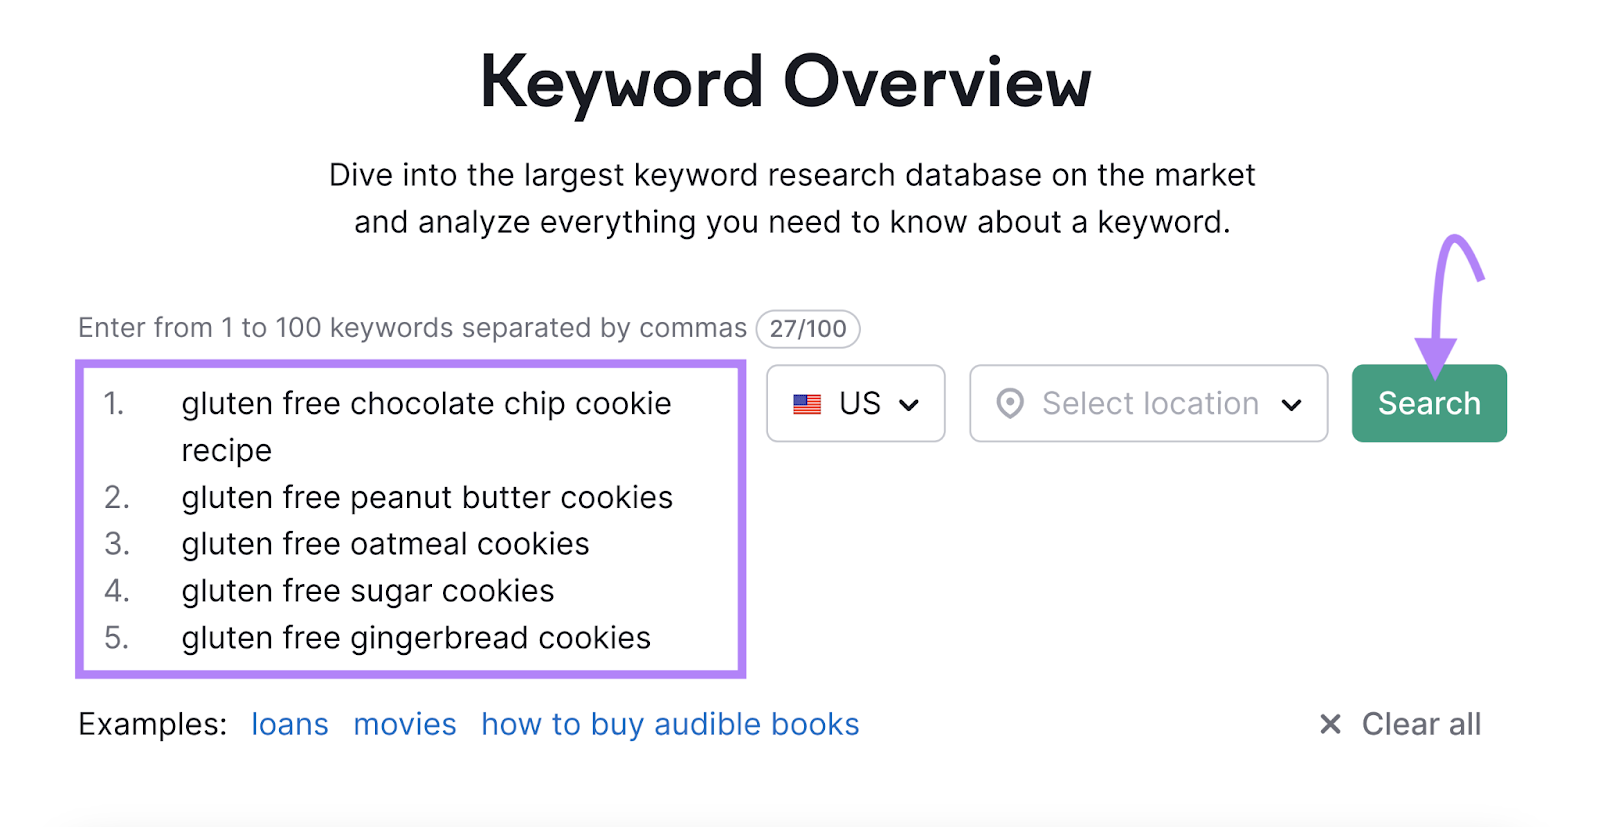 Keyword Overview tool search box